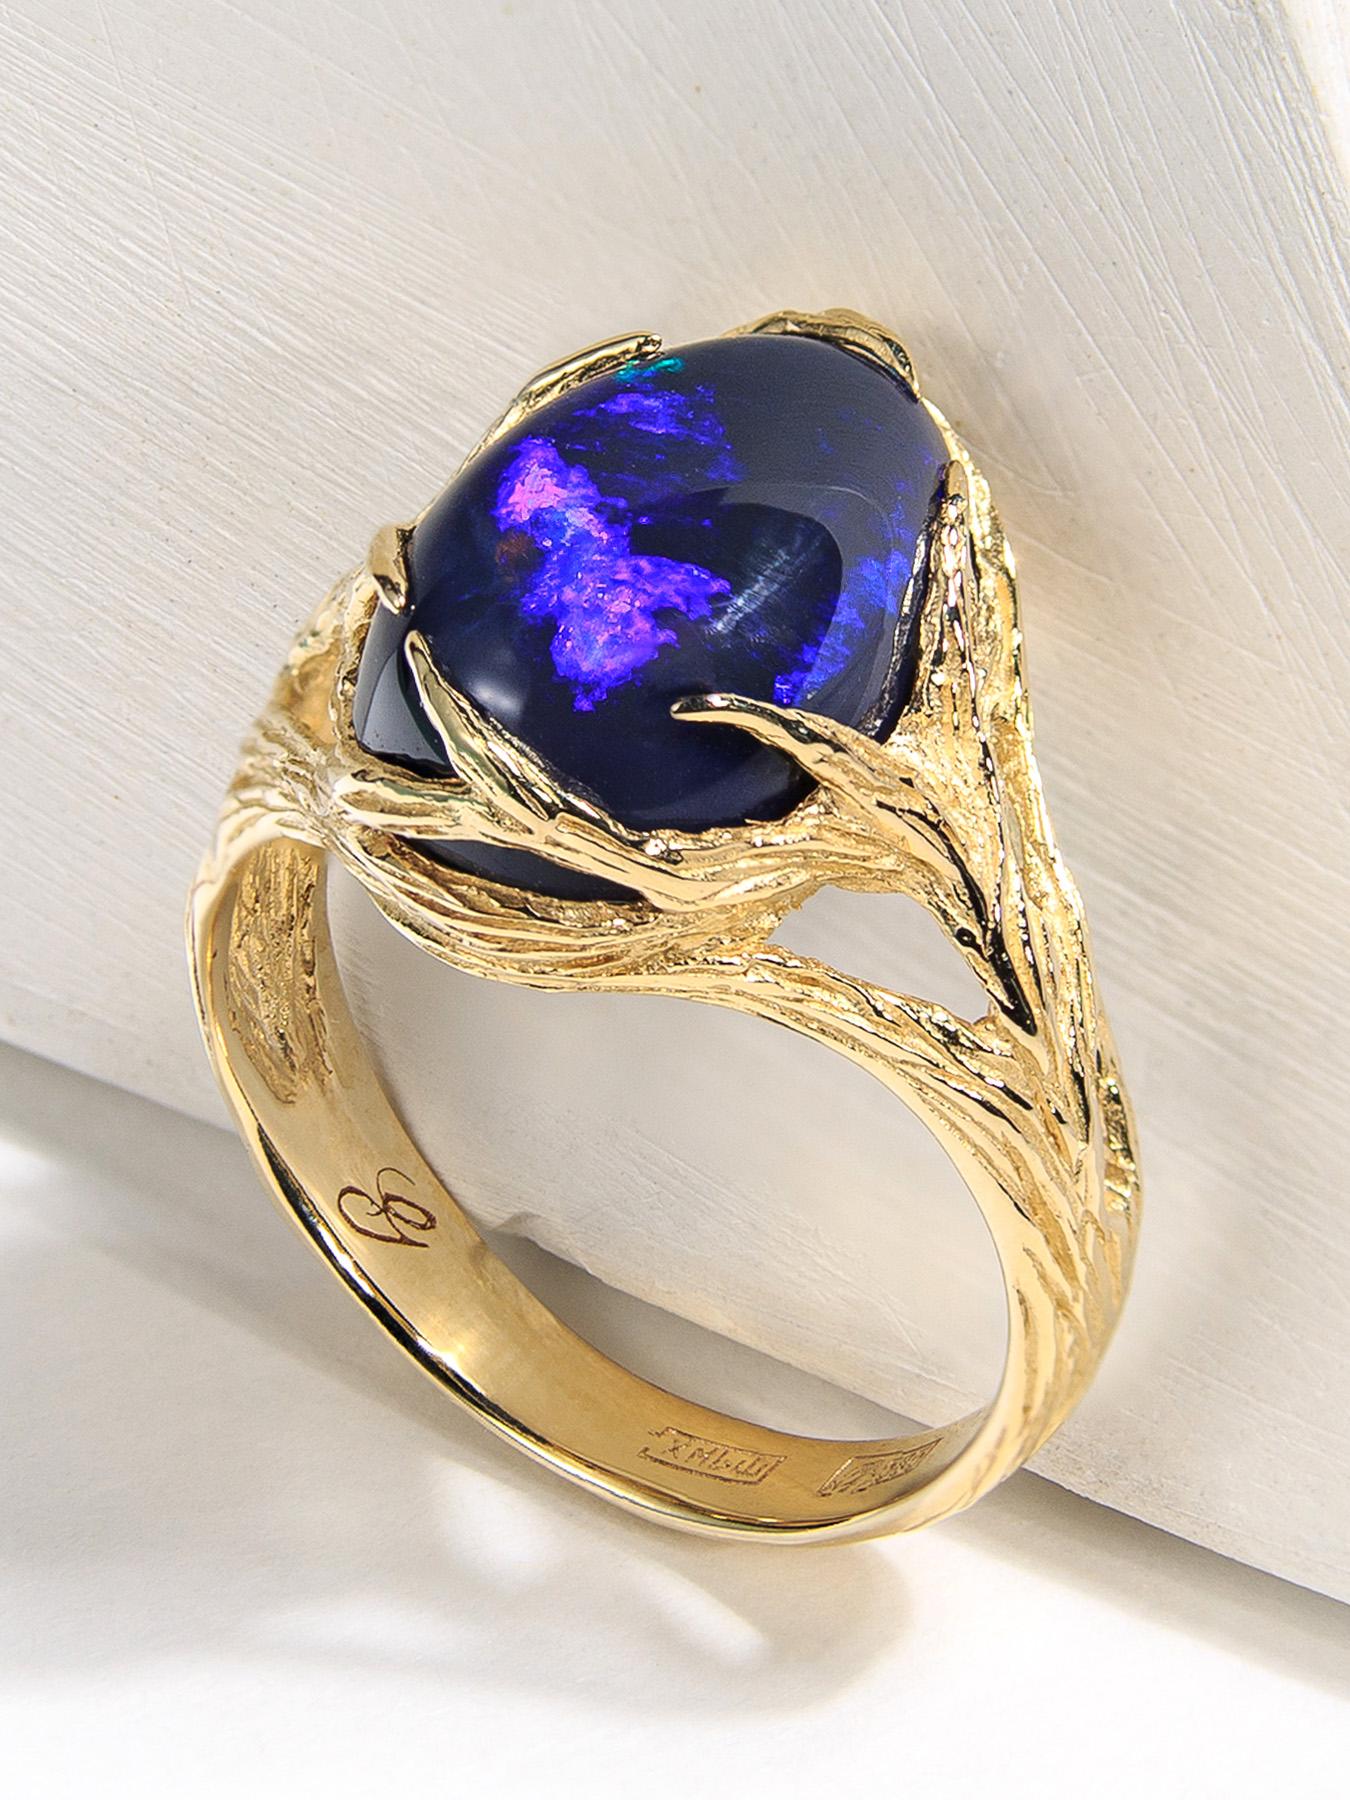 14K yellow gold ring with natural Black Opal
opal origin - Australia
opal weight - 5.93 carats
stone measurements - 0.24 х 0.35 х 0.51 in / 6 х 9 х 13 mm
ring weight - 4.53 grams
ring size - 6.5 US

Roots collection


We ship our jewelry worldwide –